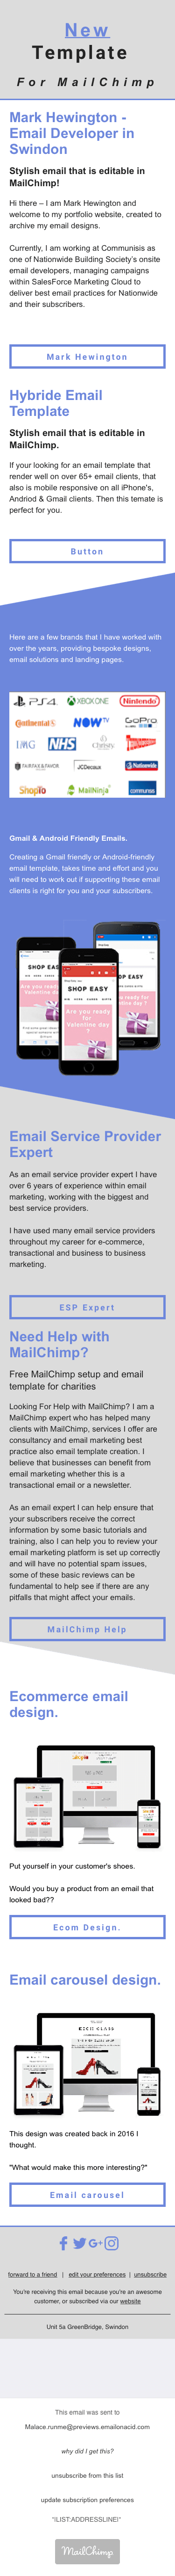 Editable MailChimp Email Template for Android